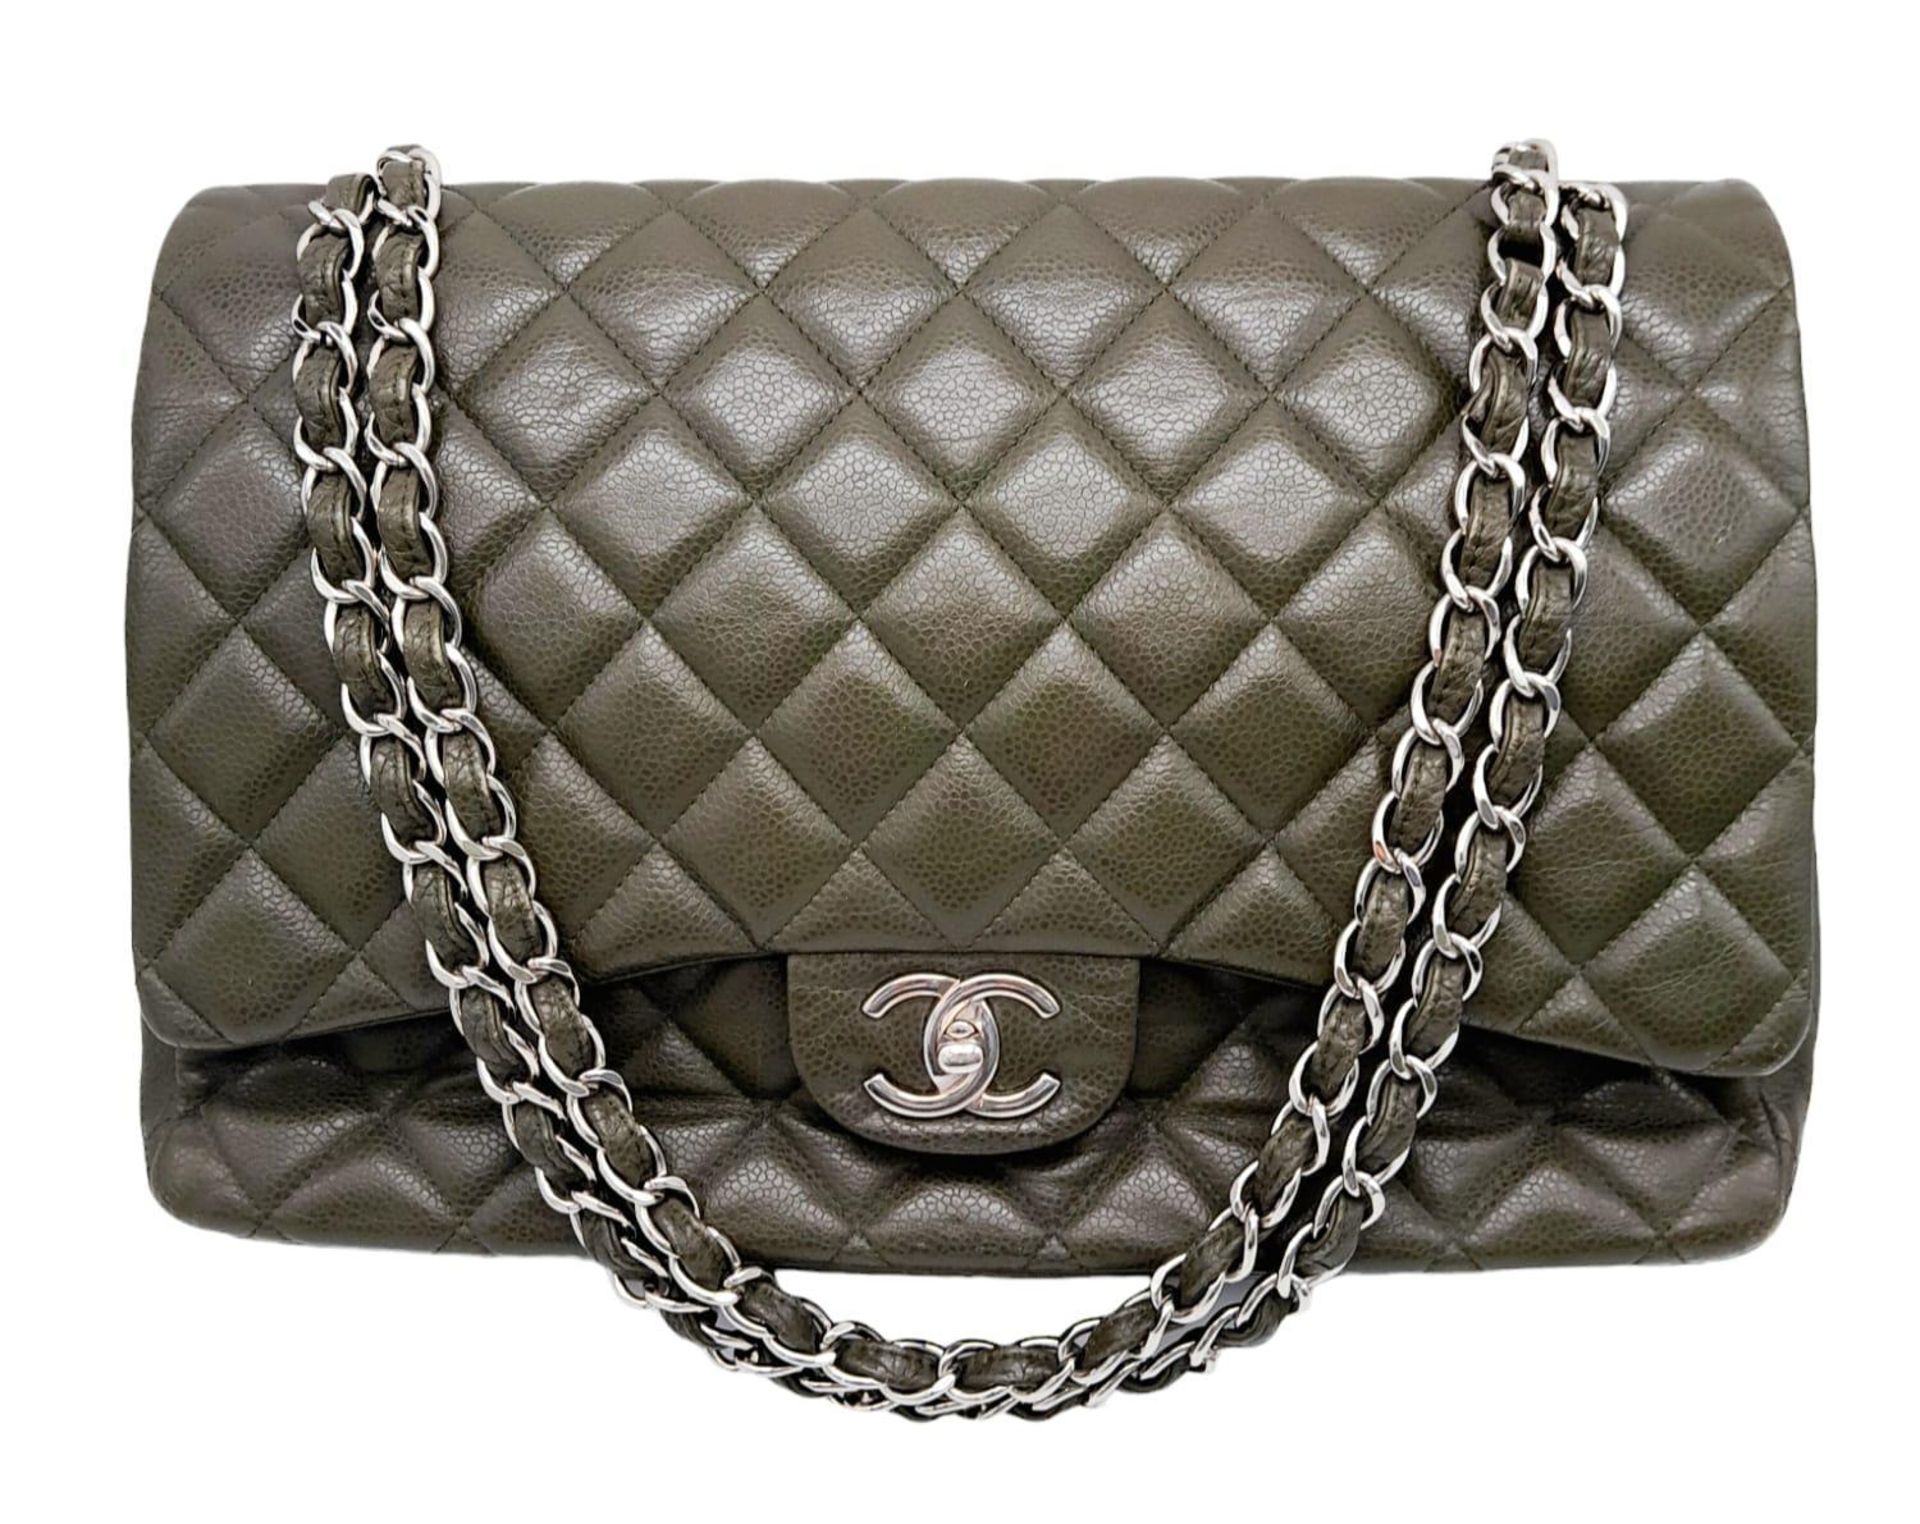 A Chanel Green Jumbo Classic Double Flap Bag. Quilted leather exterior with silver-toned hardware,